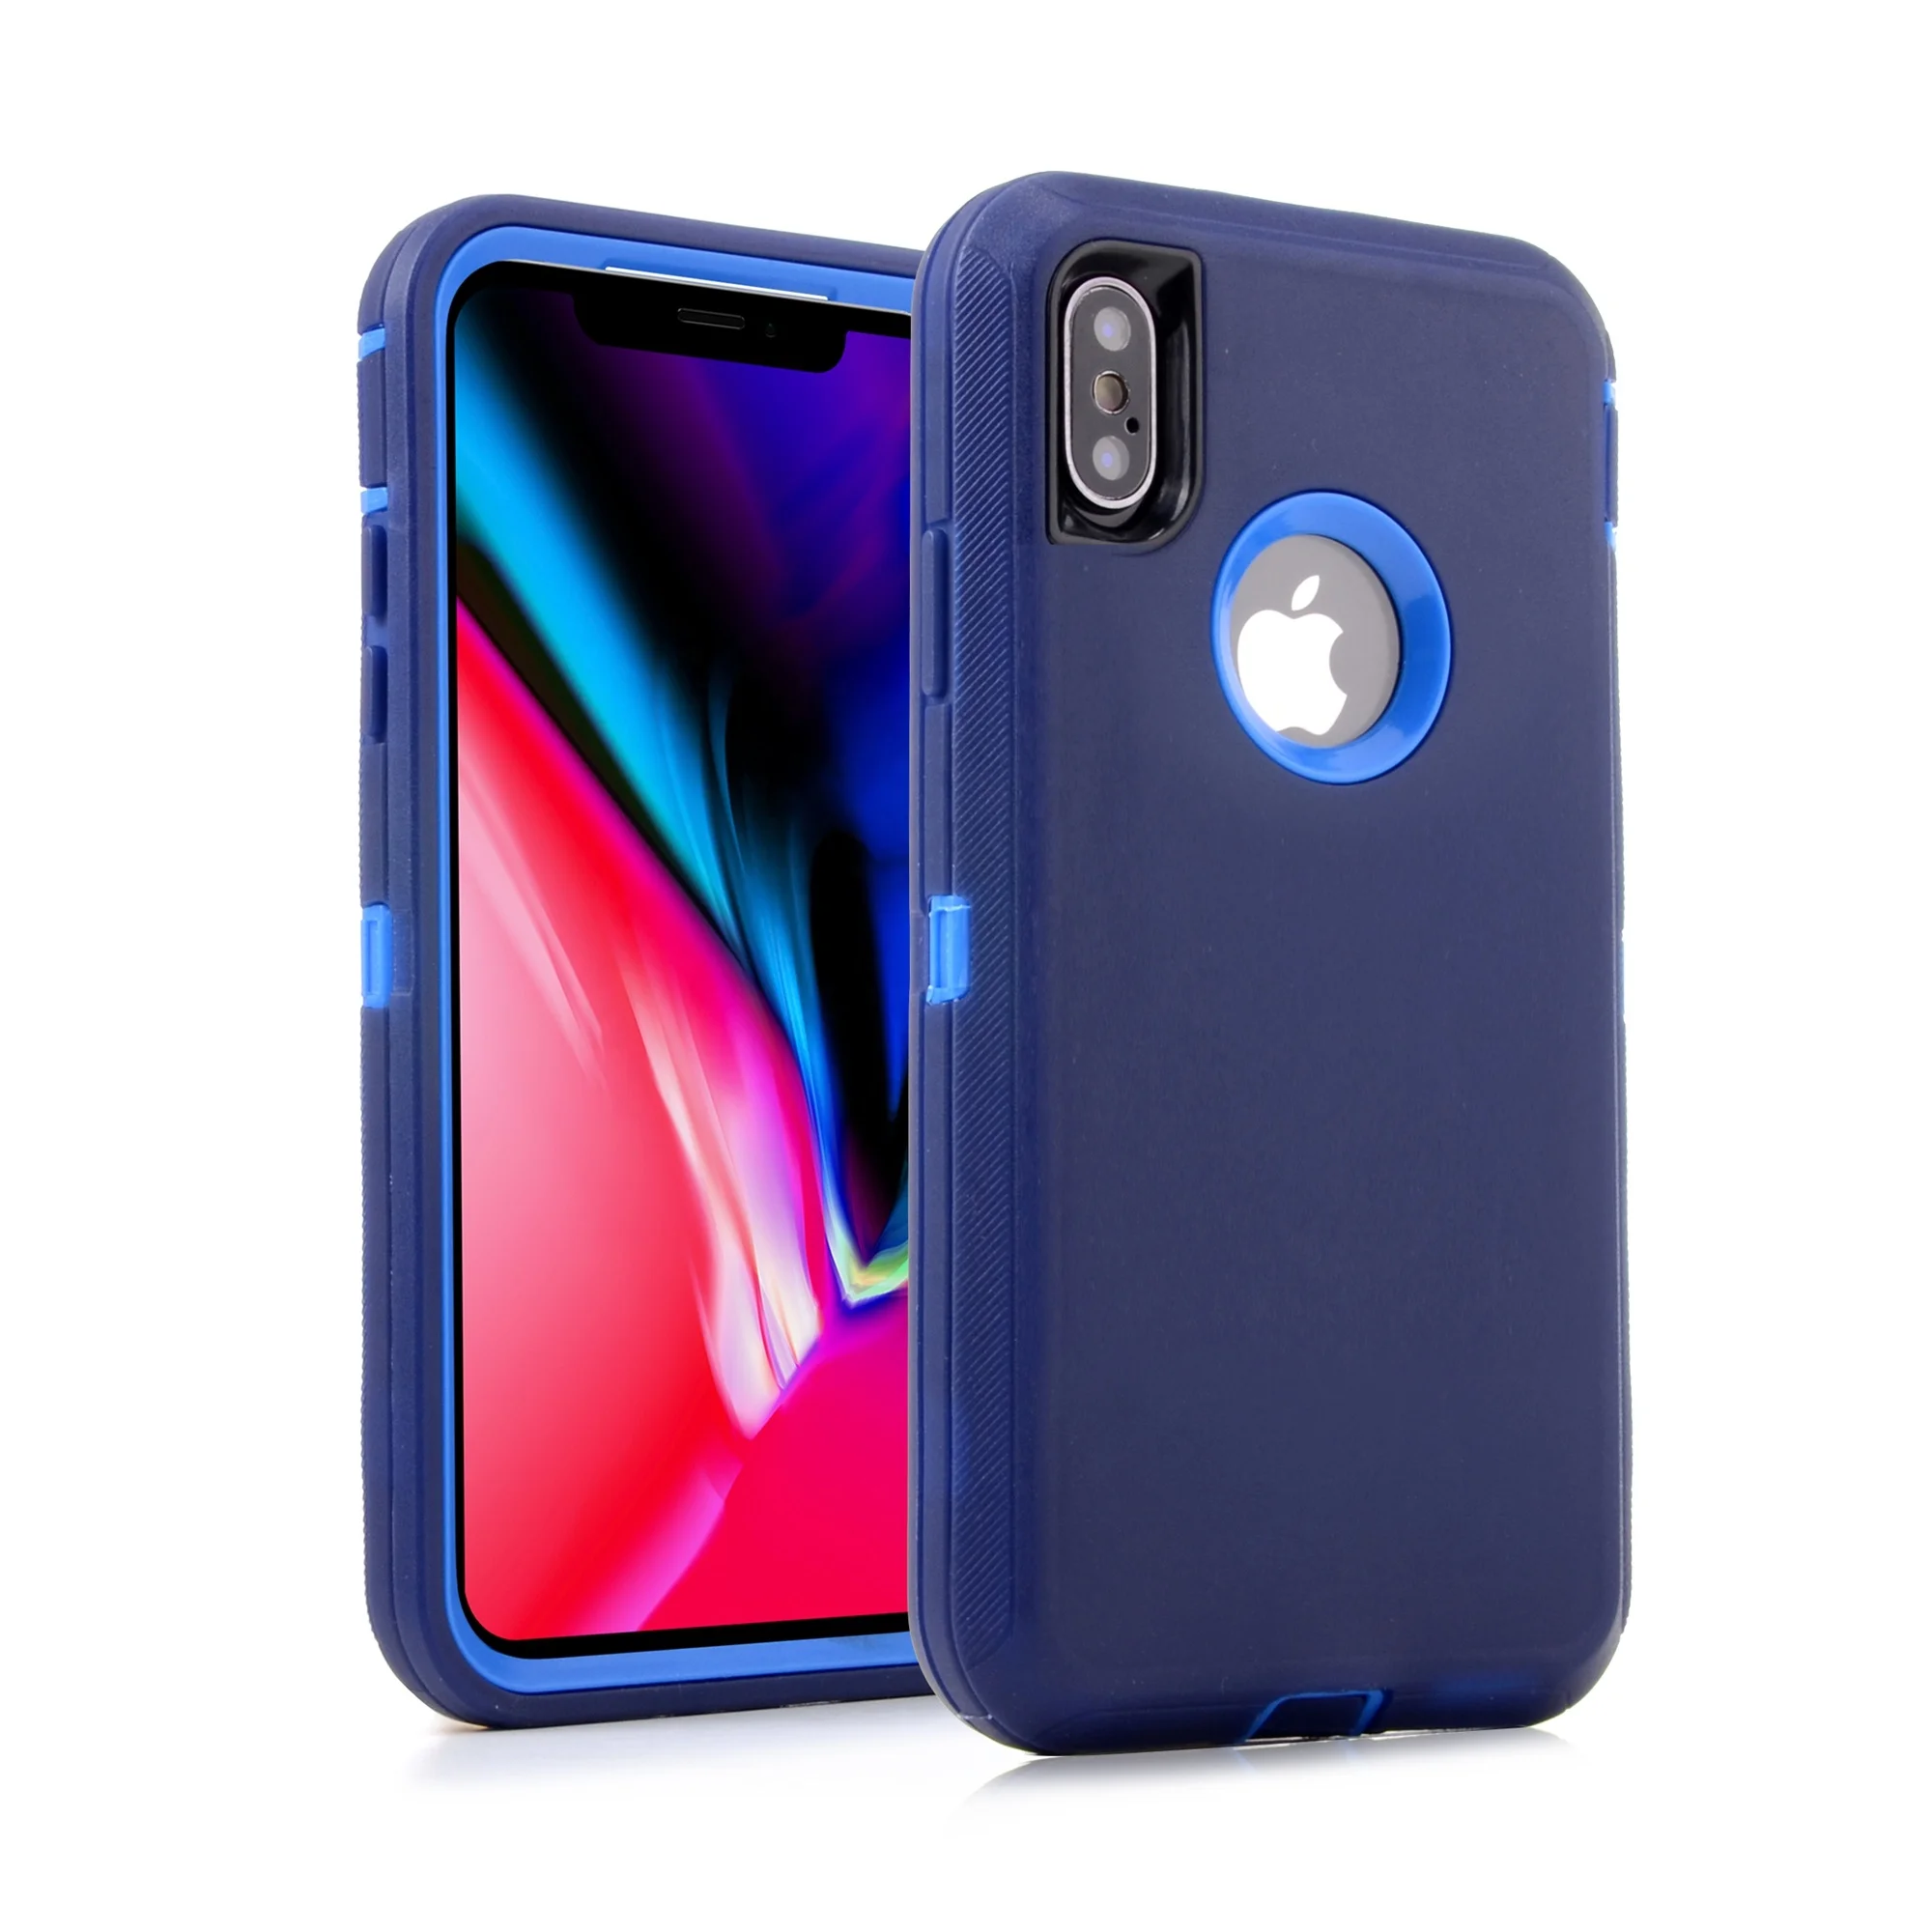 

High Quality Packaging Smartphone Smooth Shockproof Pc Tpu Bumper 3 In 1 Cell Mold Defender Phone Case For Iphone x xr 11 Pro